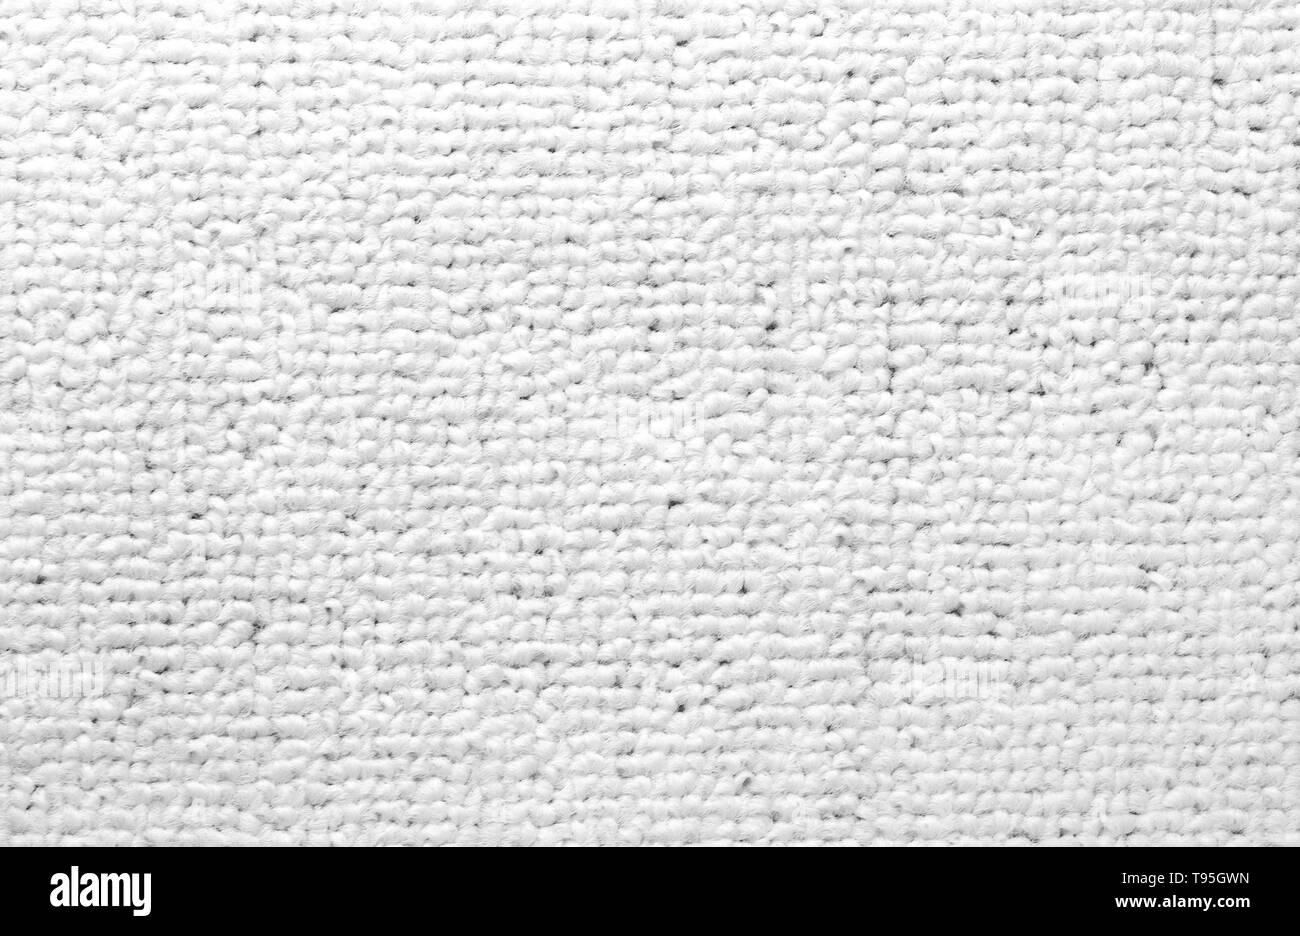 Paper napkin texture Black and White Stock Photos & Images - Alamy